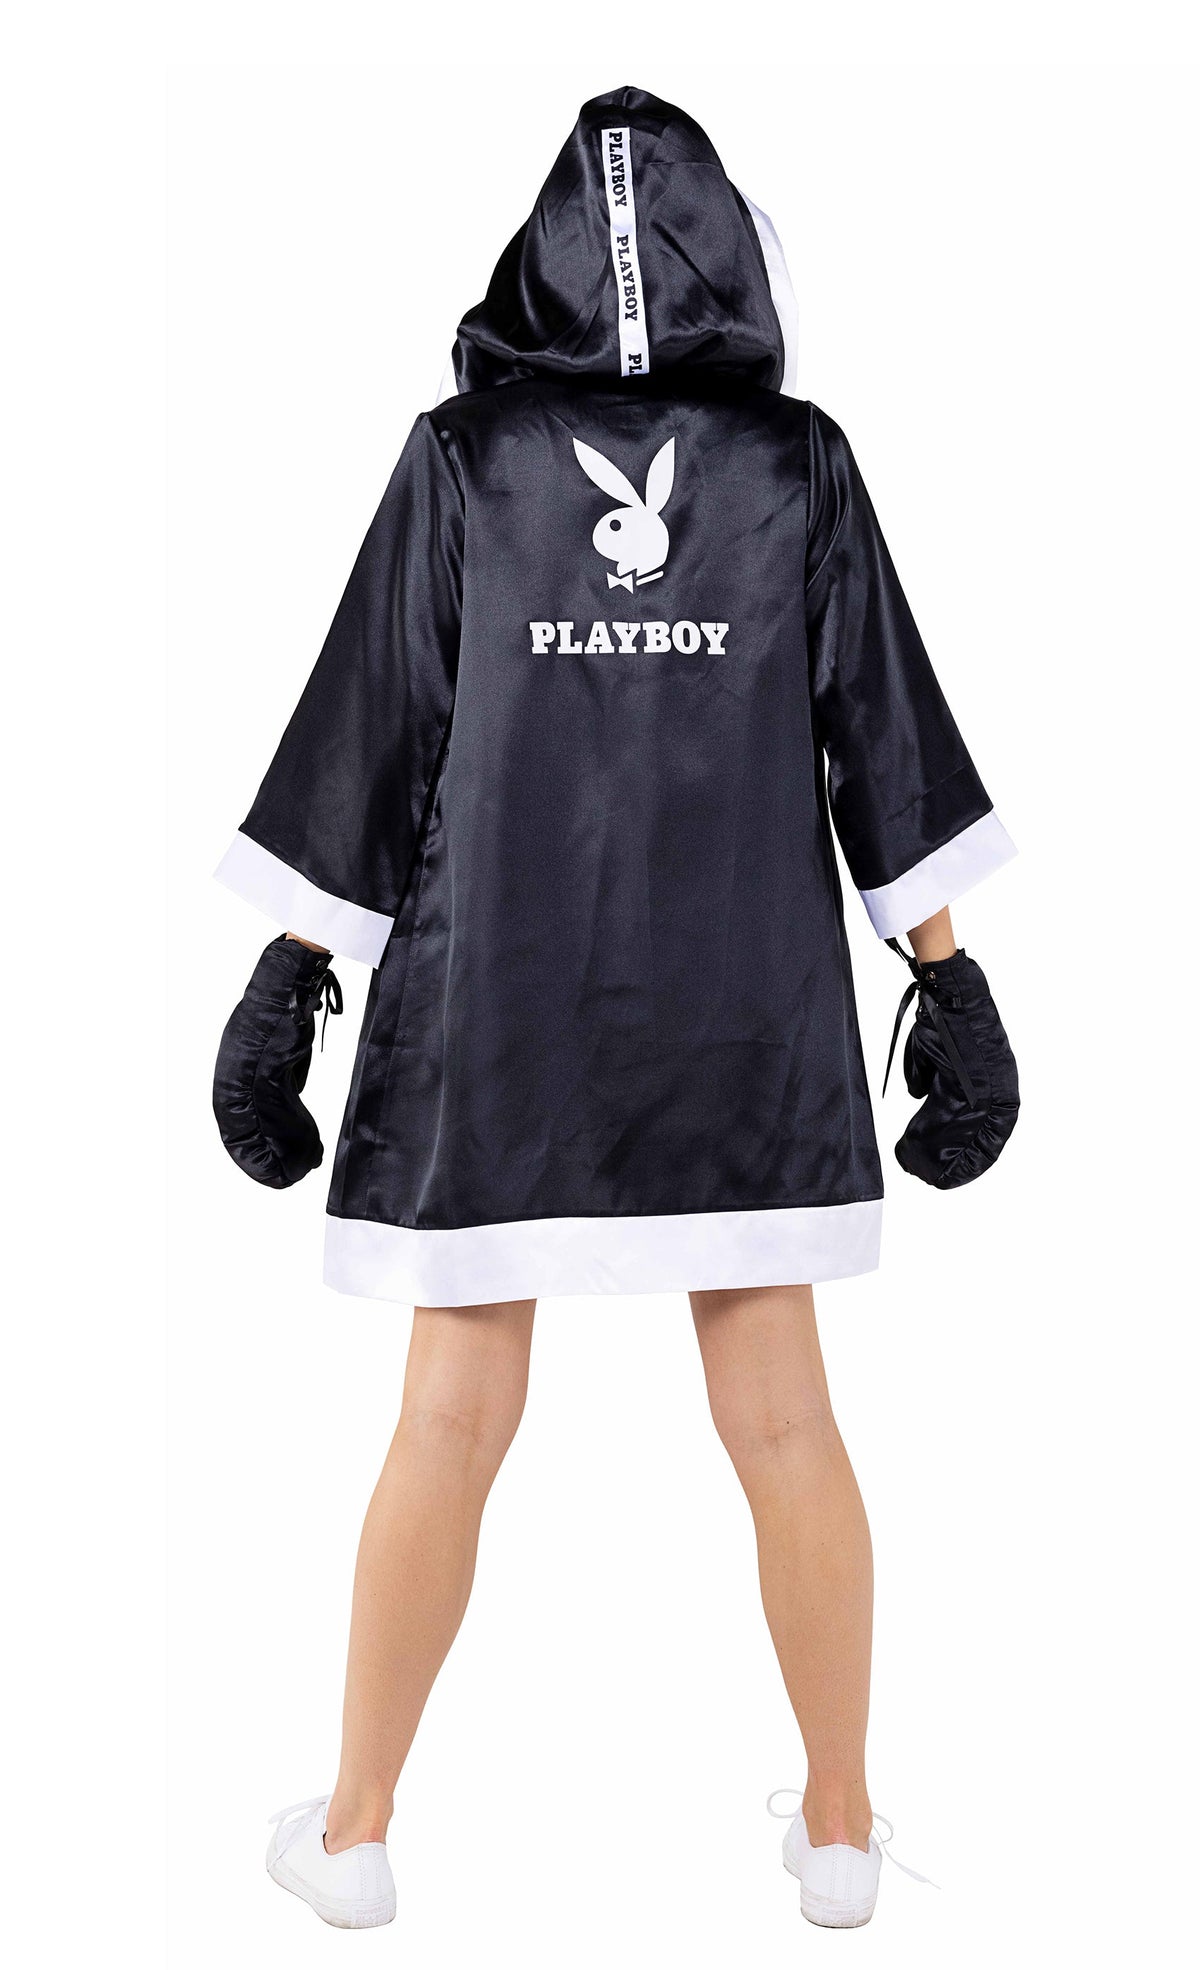 5pc Playboy Knock-Out Boxer Costume-Roma Costume